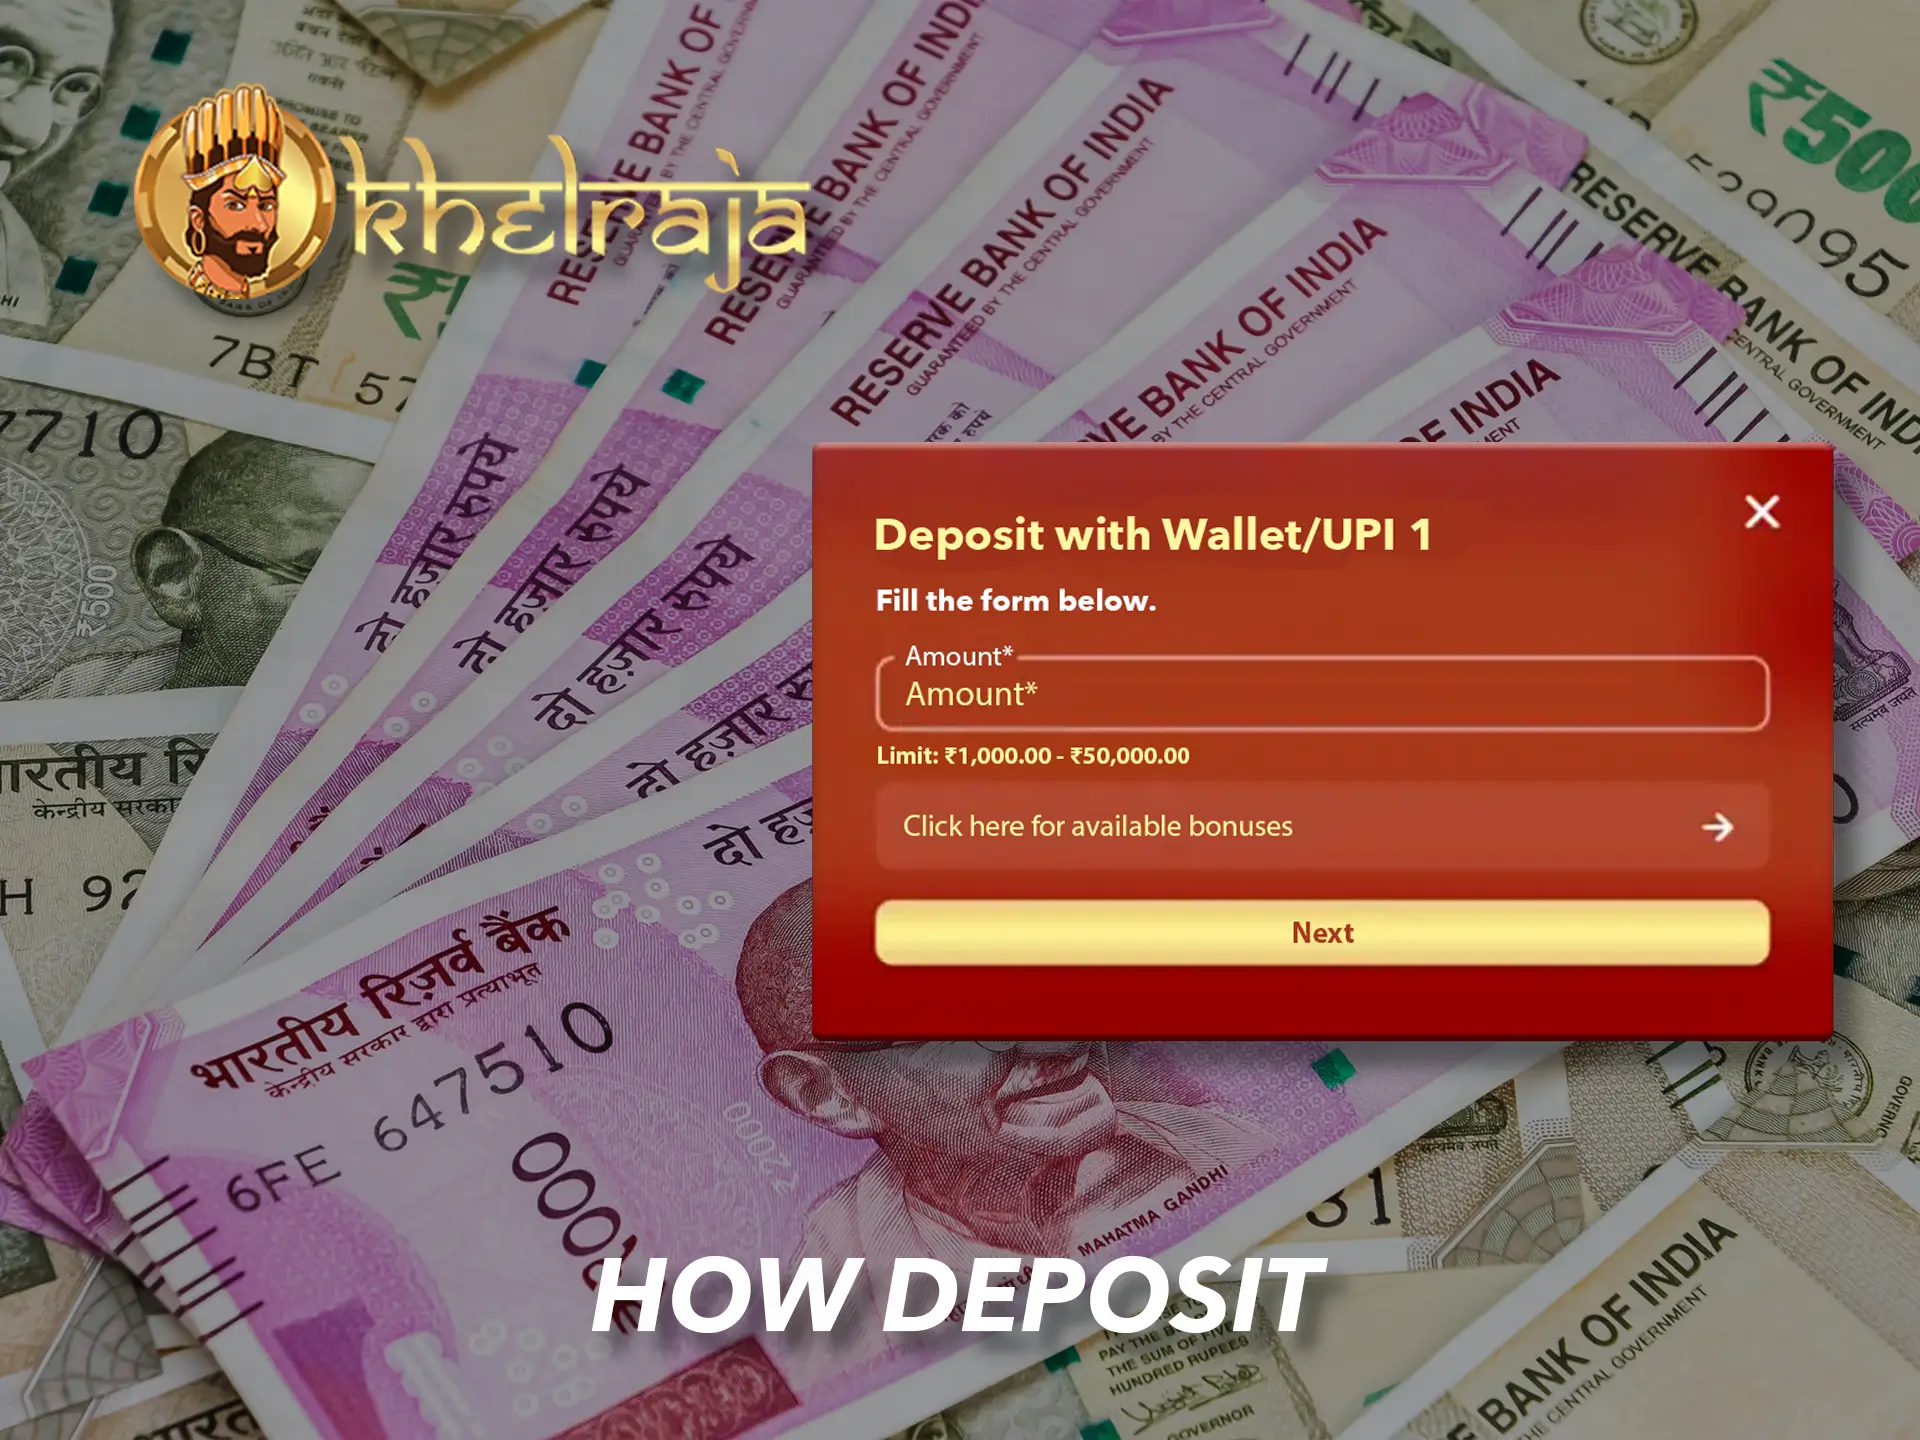 Make your first deposit at the Khelraja Casino website.